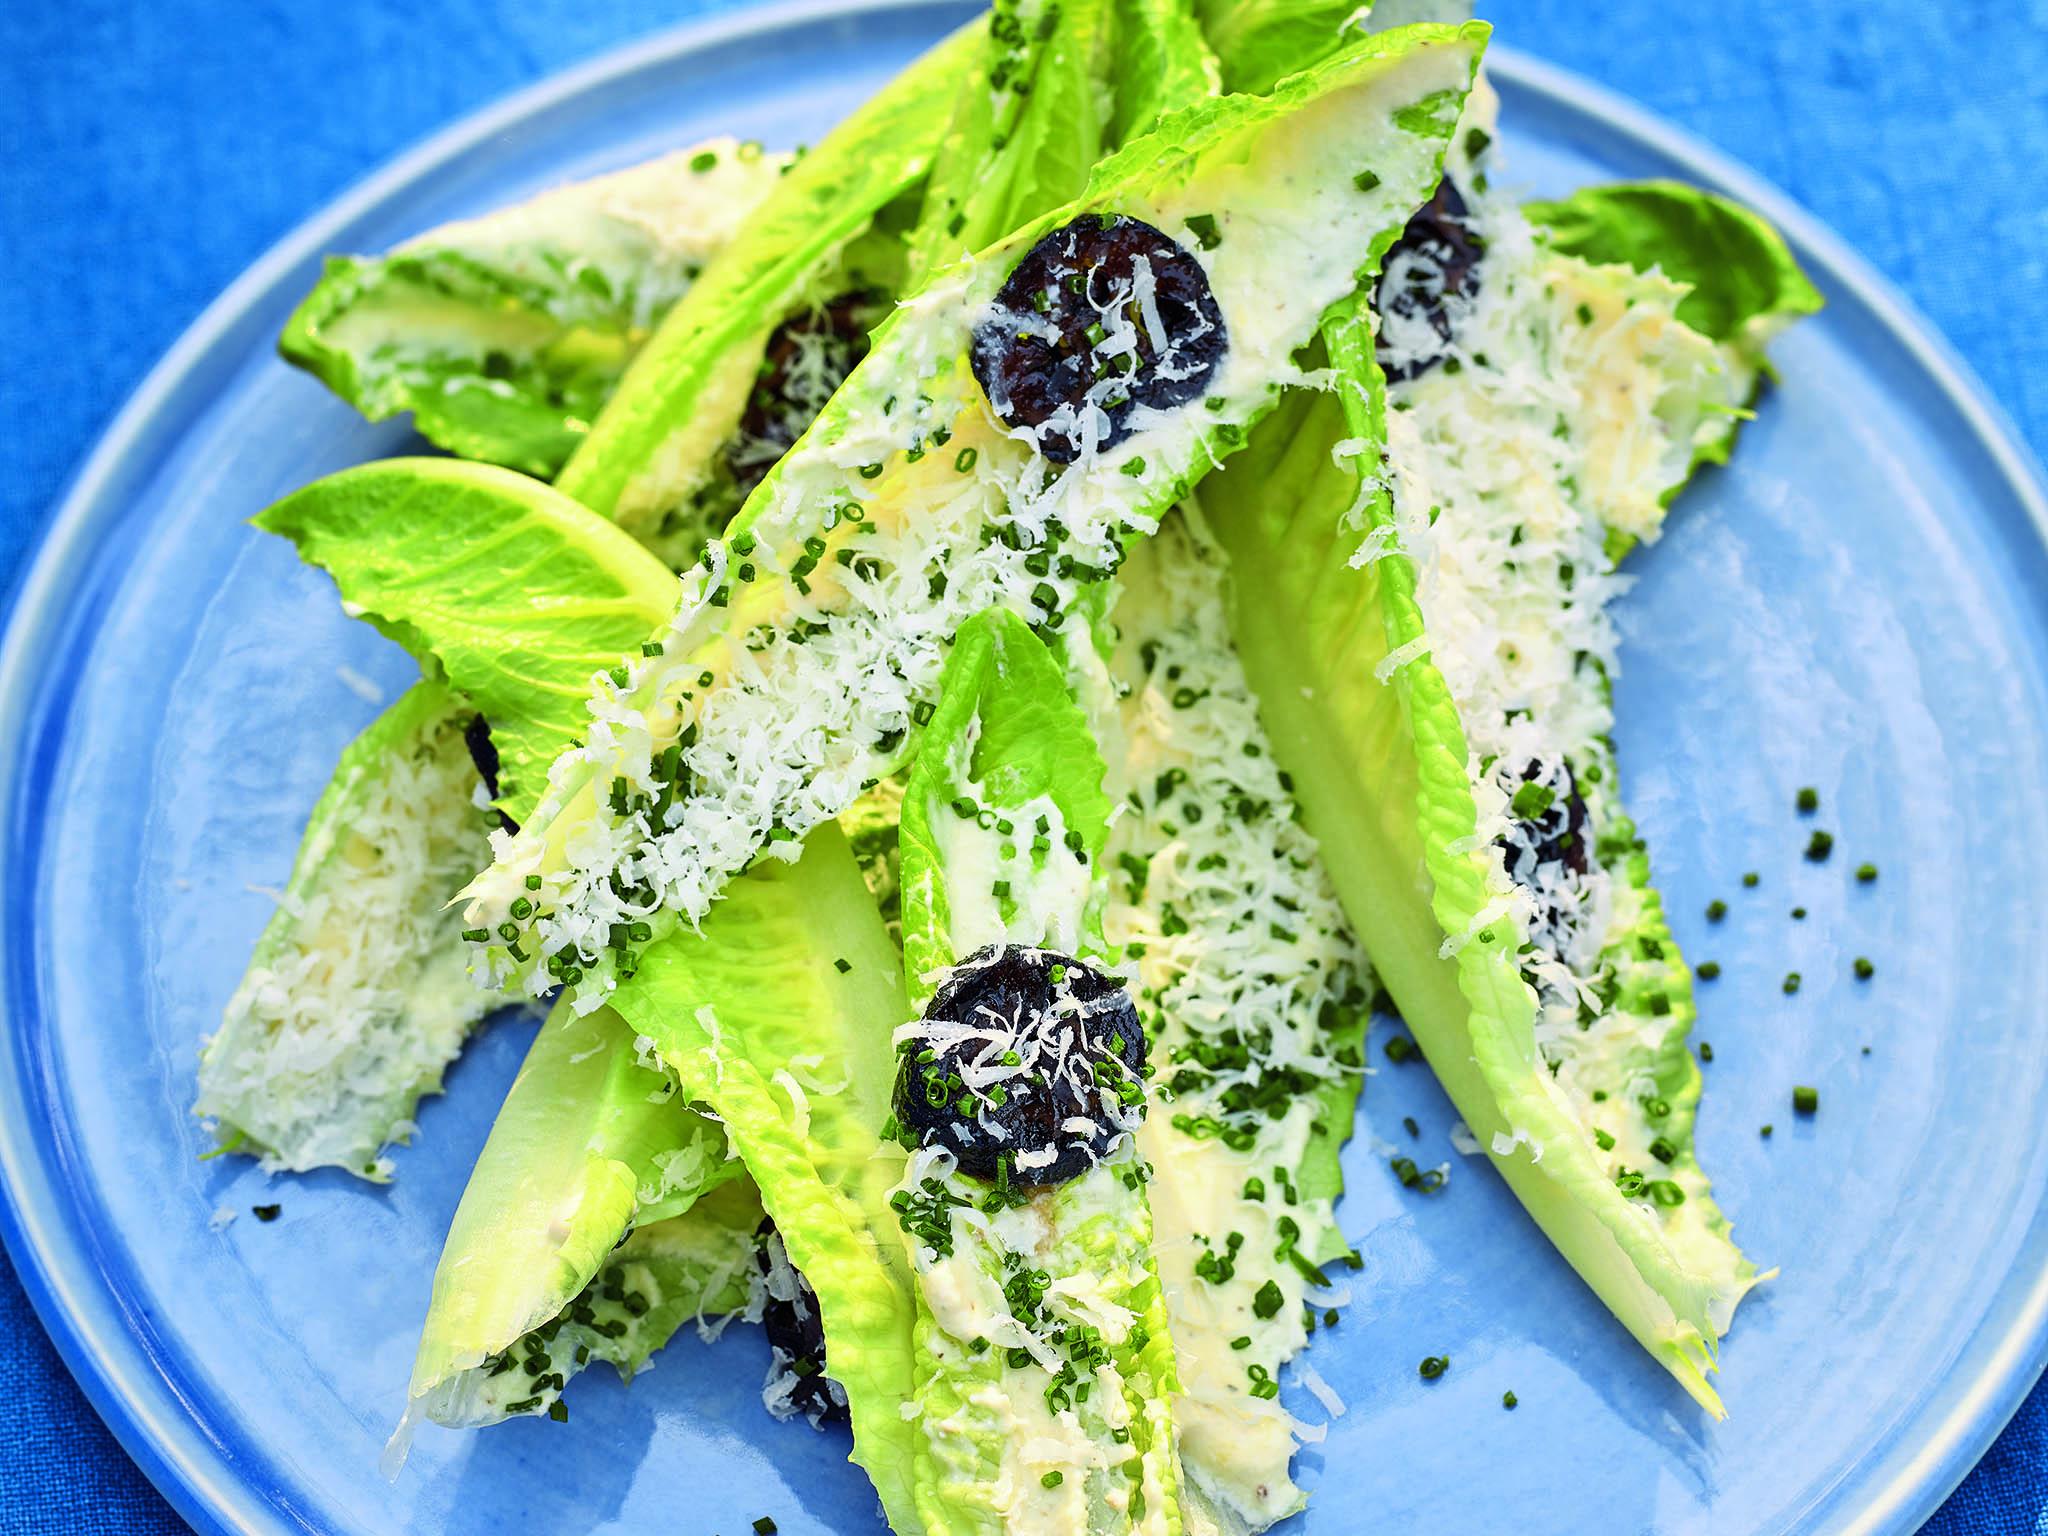 Inspired by a dish in a restaurant in Istanbul, it took years to perfect the romaine lettuce recipe (Photography by Chris Terry)